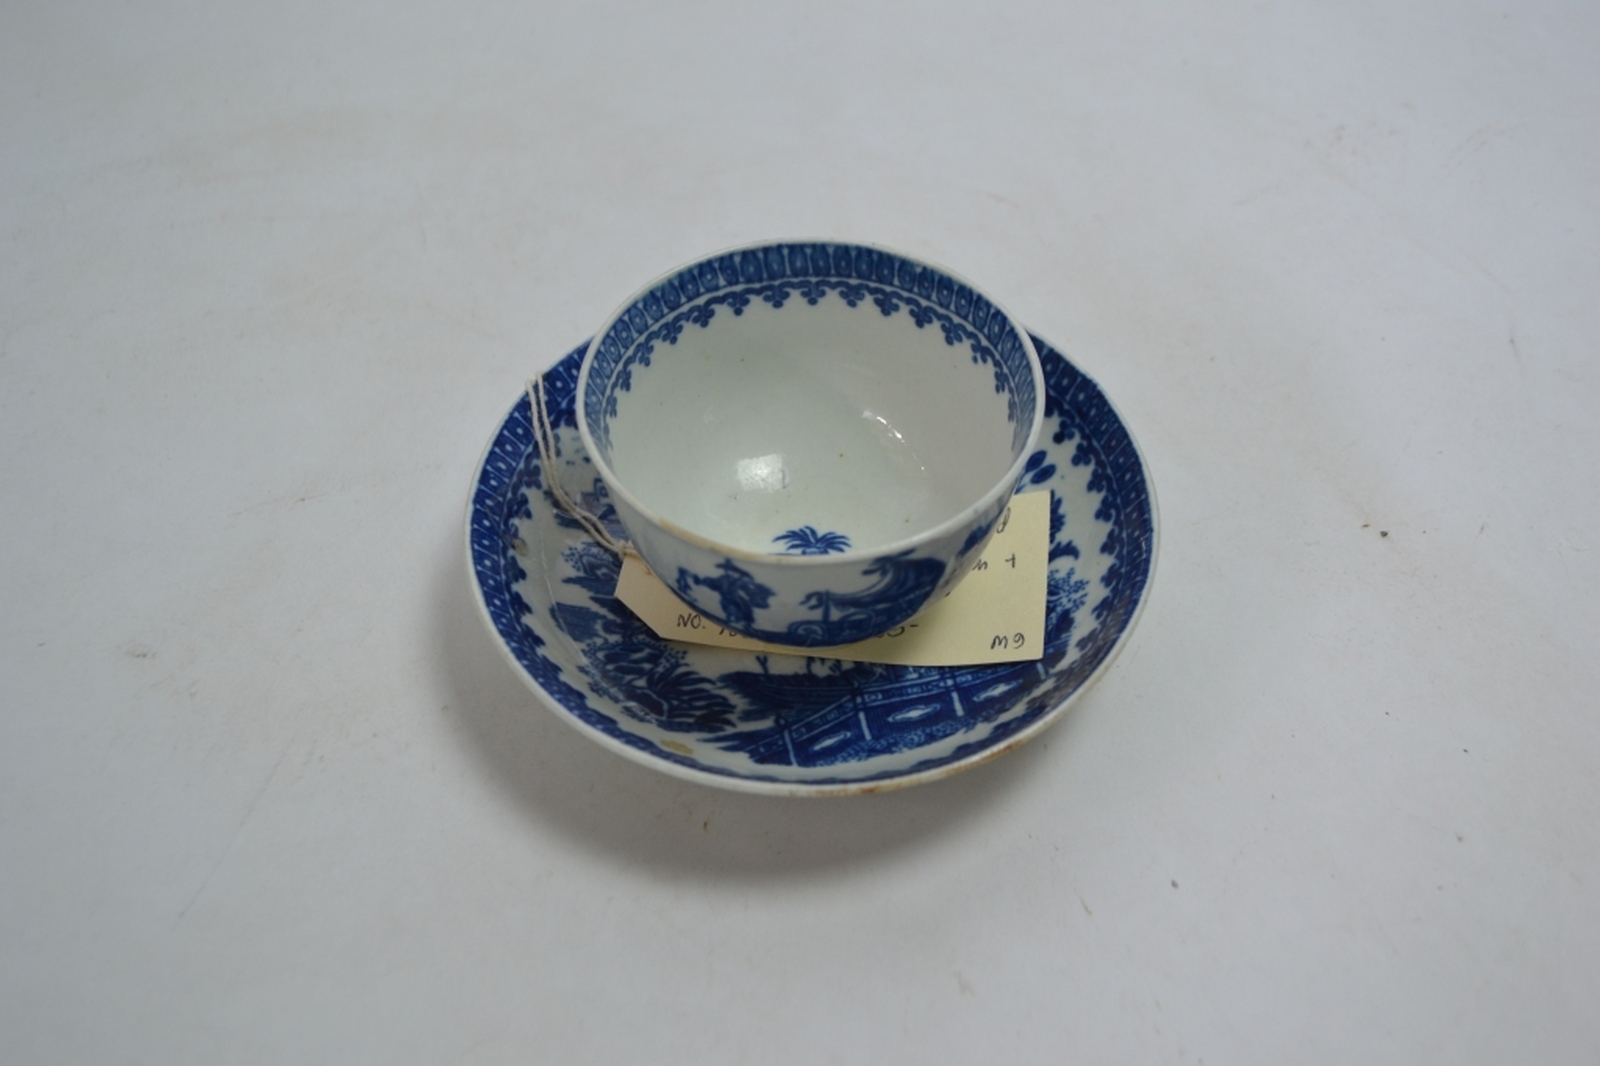 A Late 18th Century Worcester Teabowl and Saucer Decorated in the Underglaze Blue and White Fisherman and Cormorant Pattern